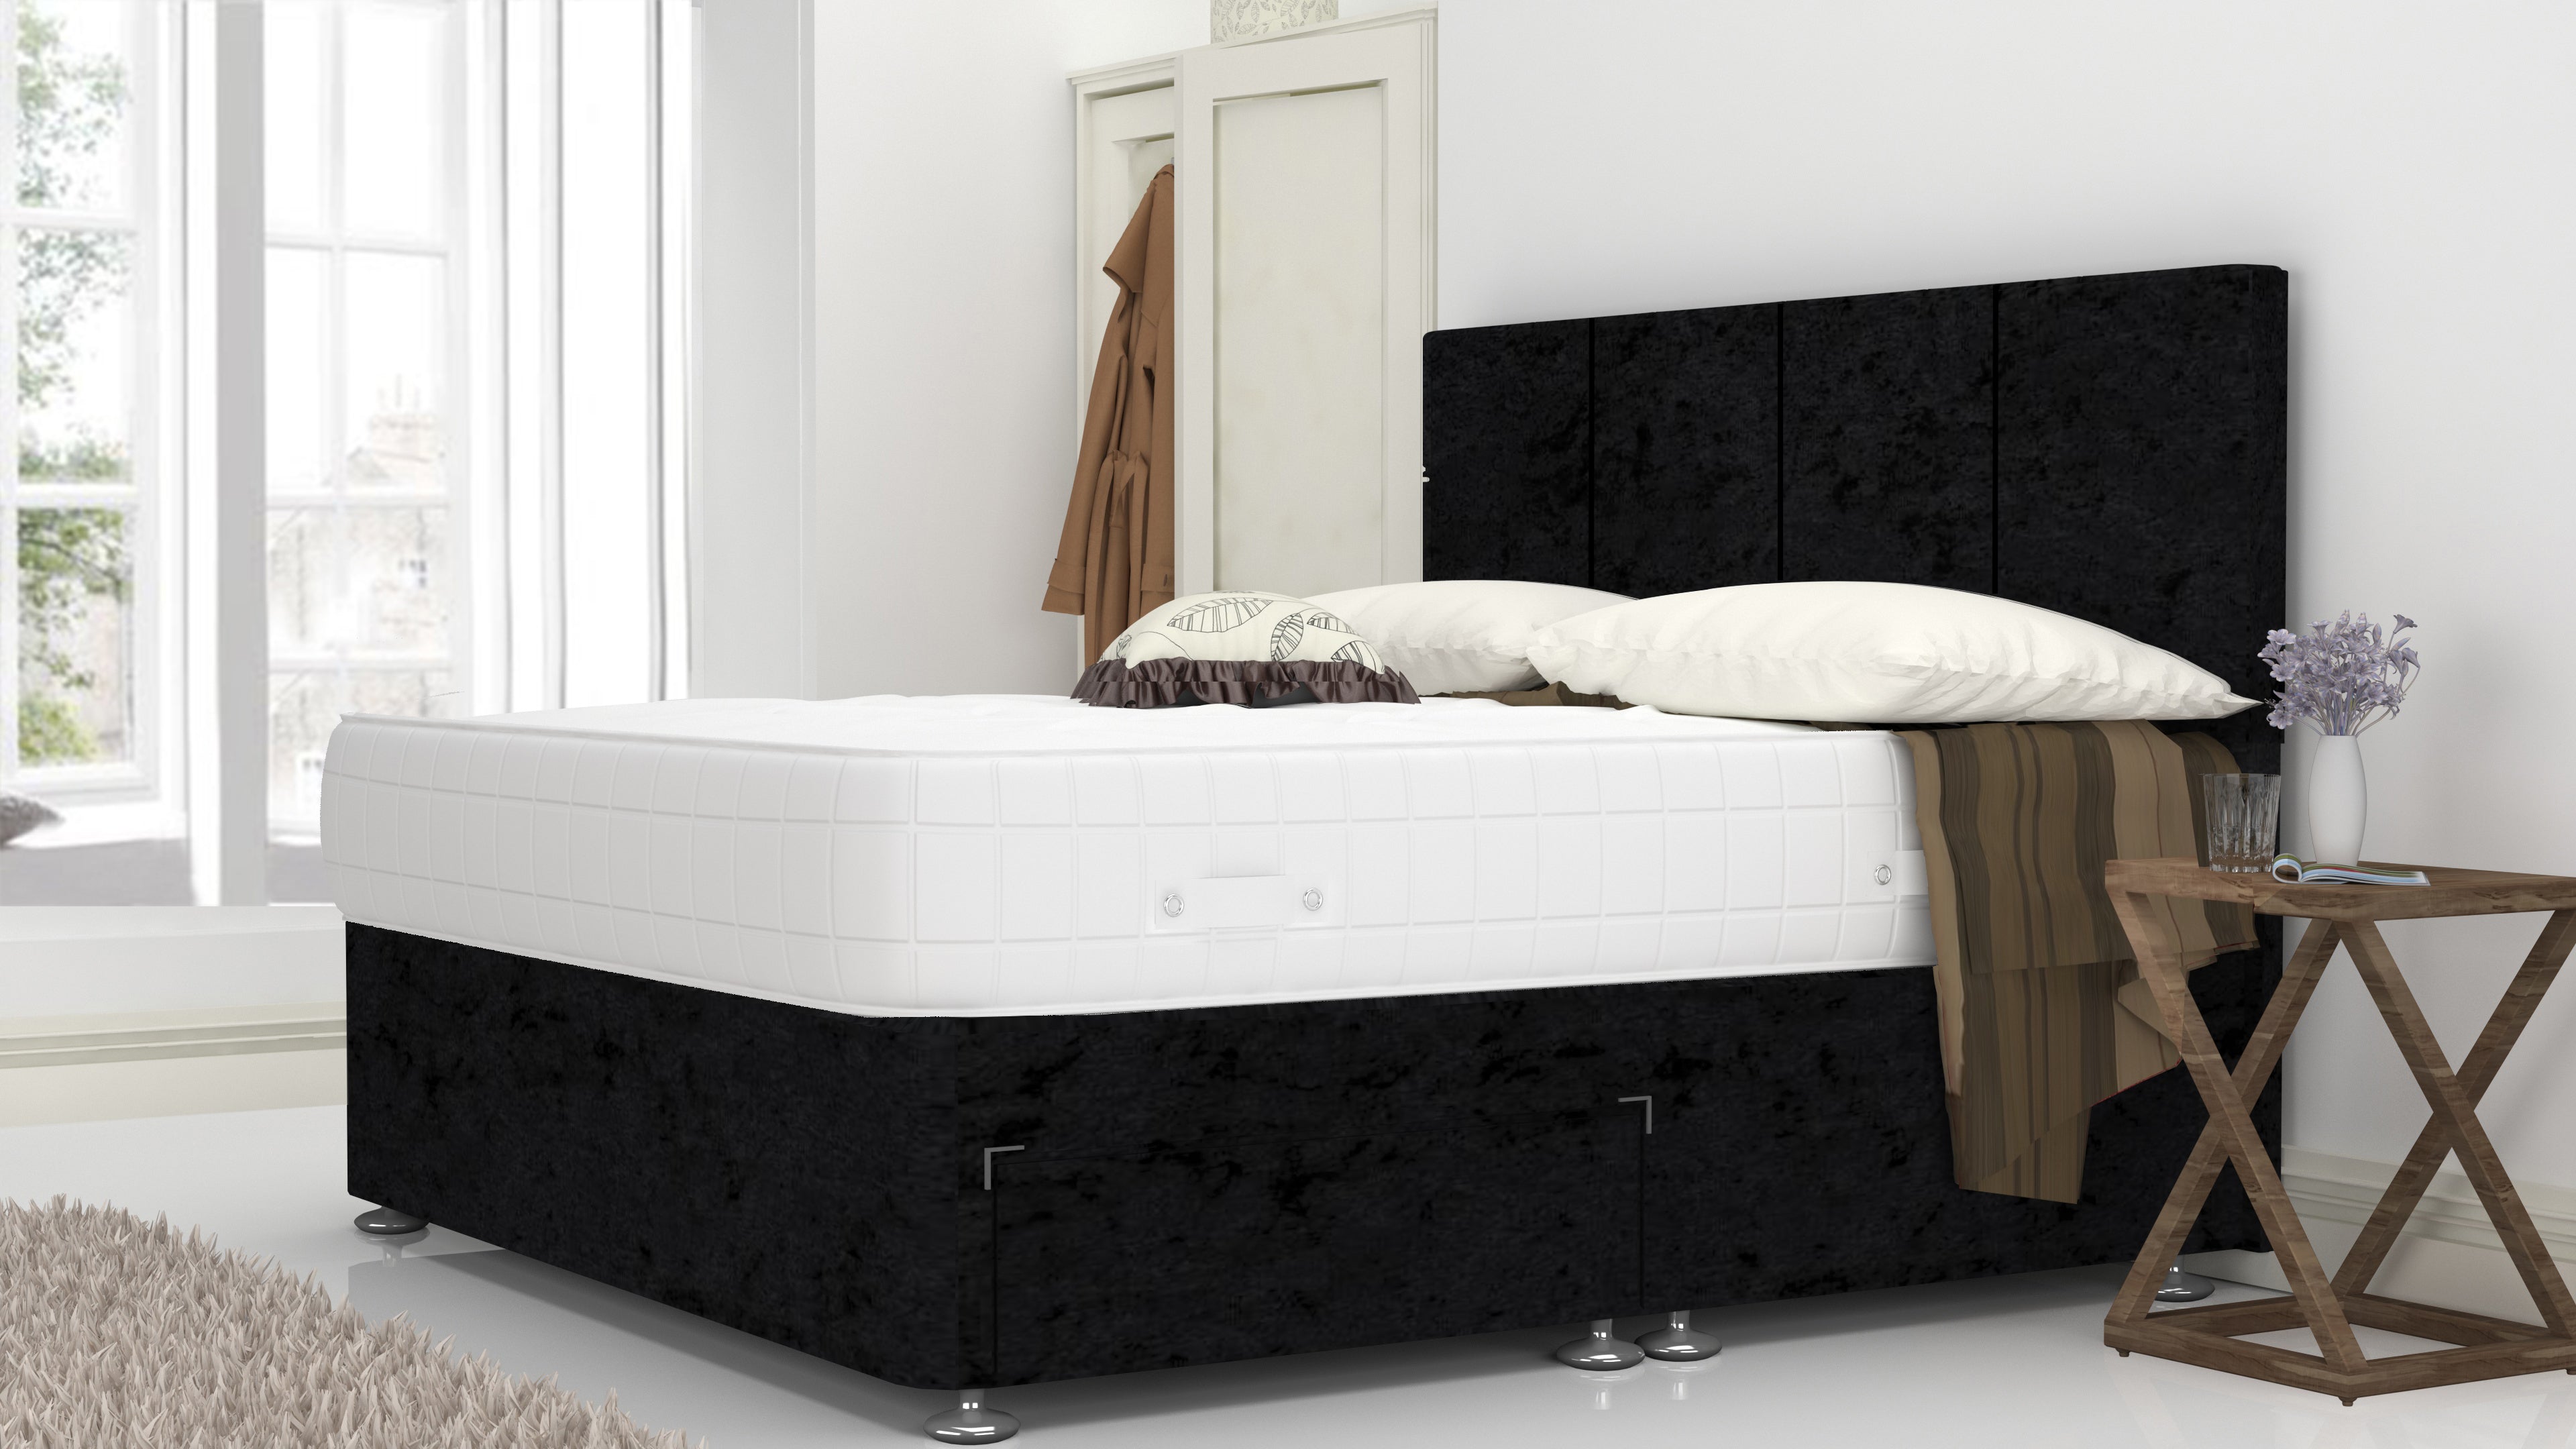 Black Crushed 6 Feet Divan Bed Set With 4 Panel Headboard (Included Feet) And Free Tinsel Top Mattress